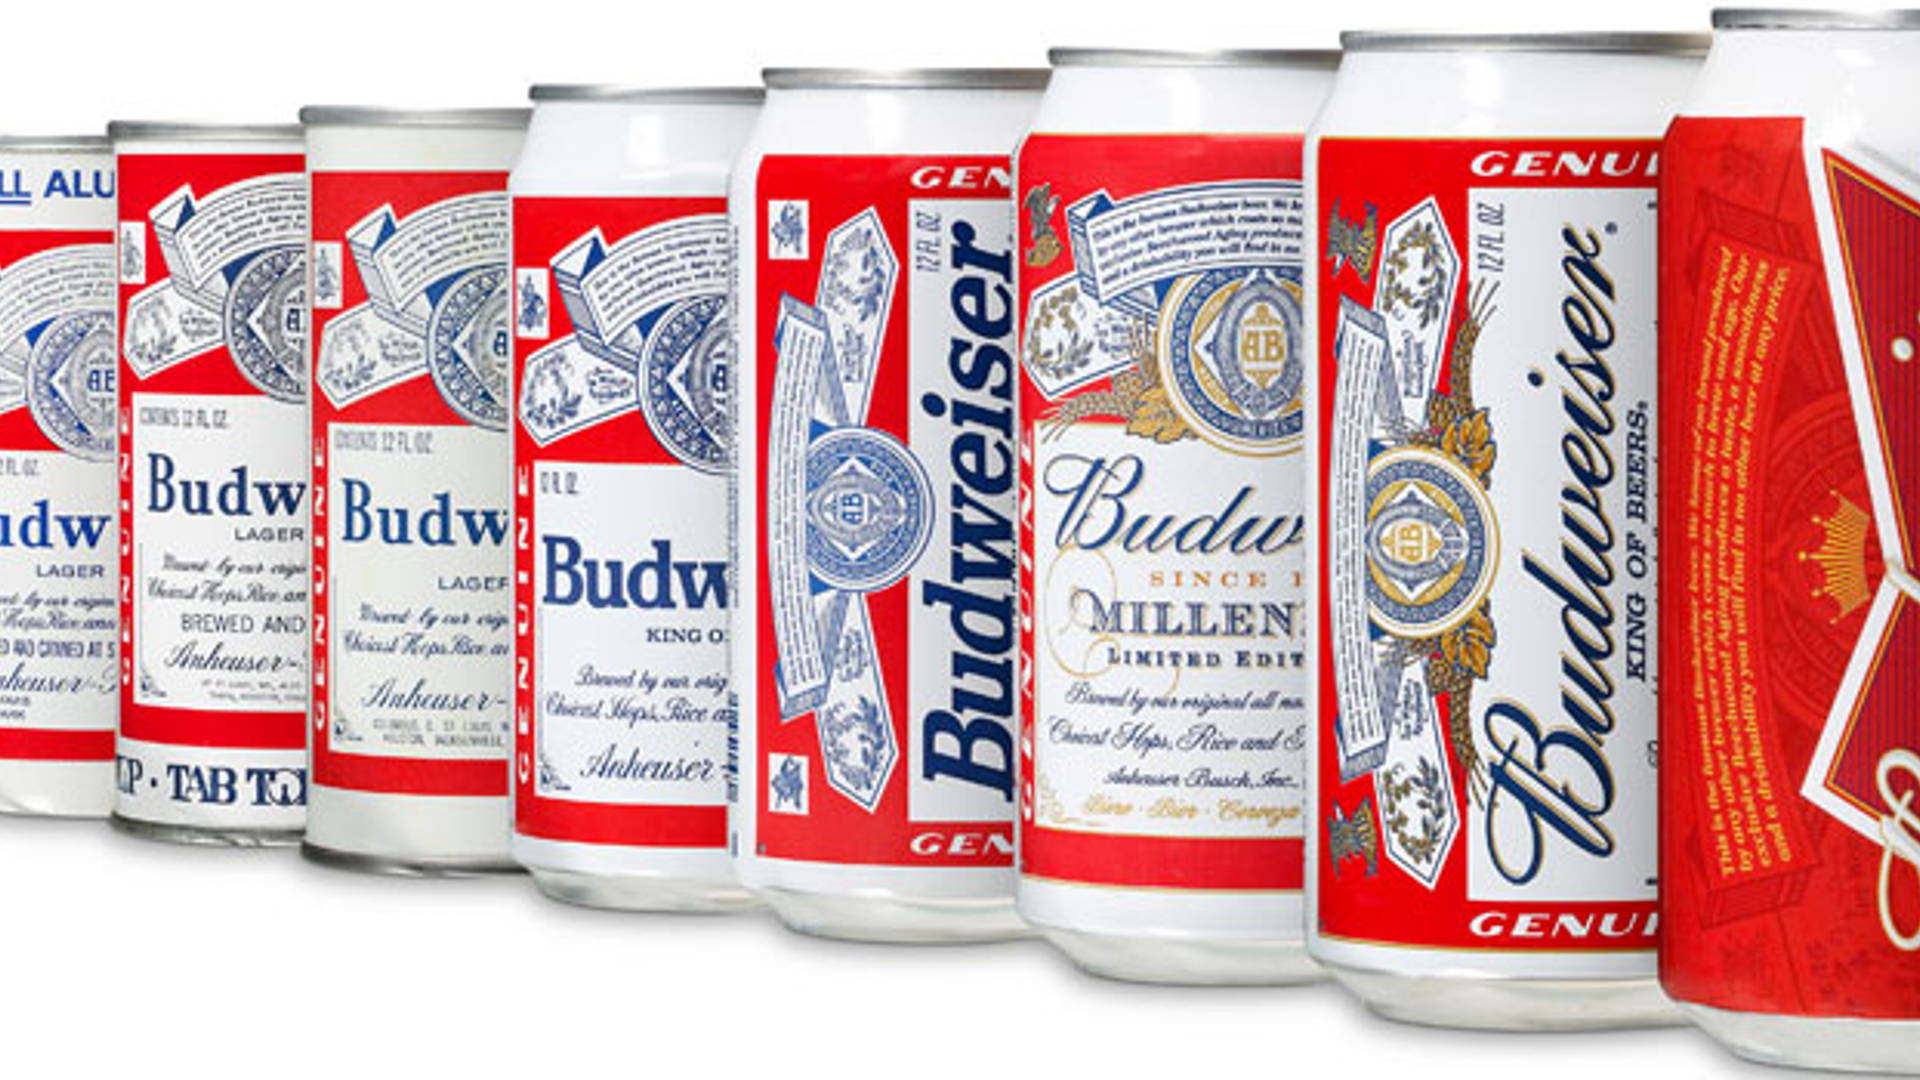 Featured image for Budweiser Rebrands With New "Bowtie" Design